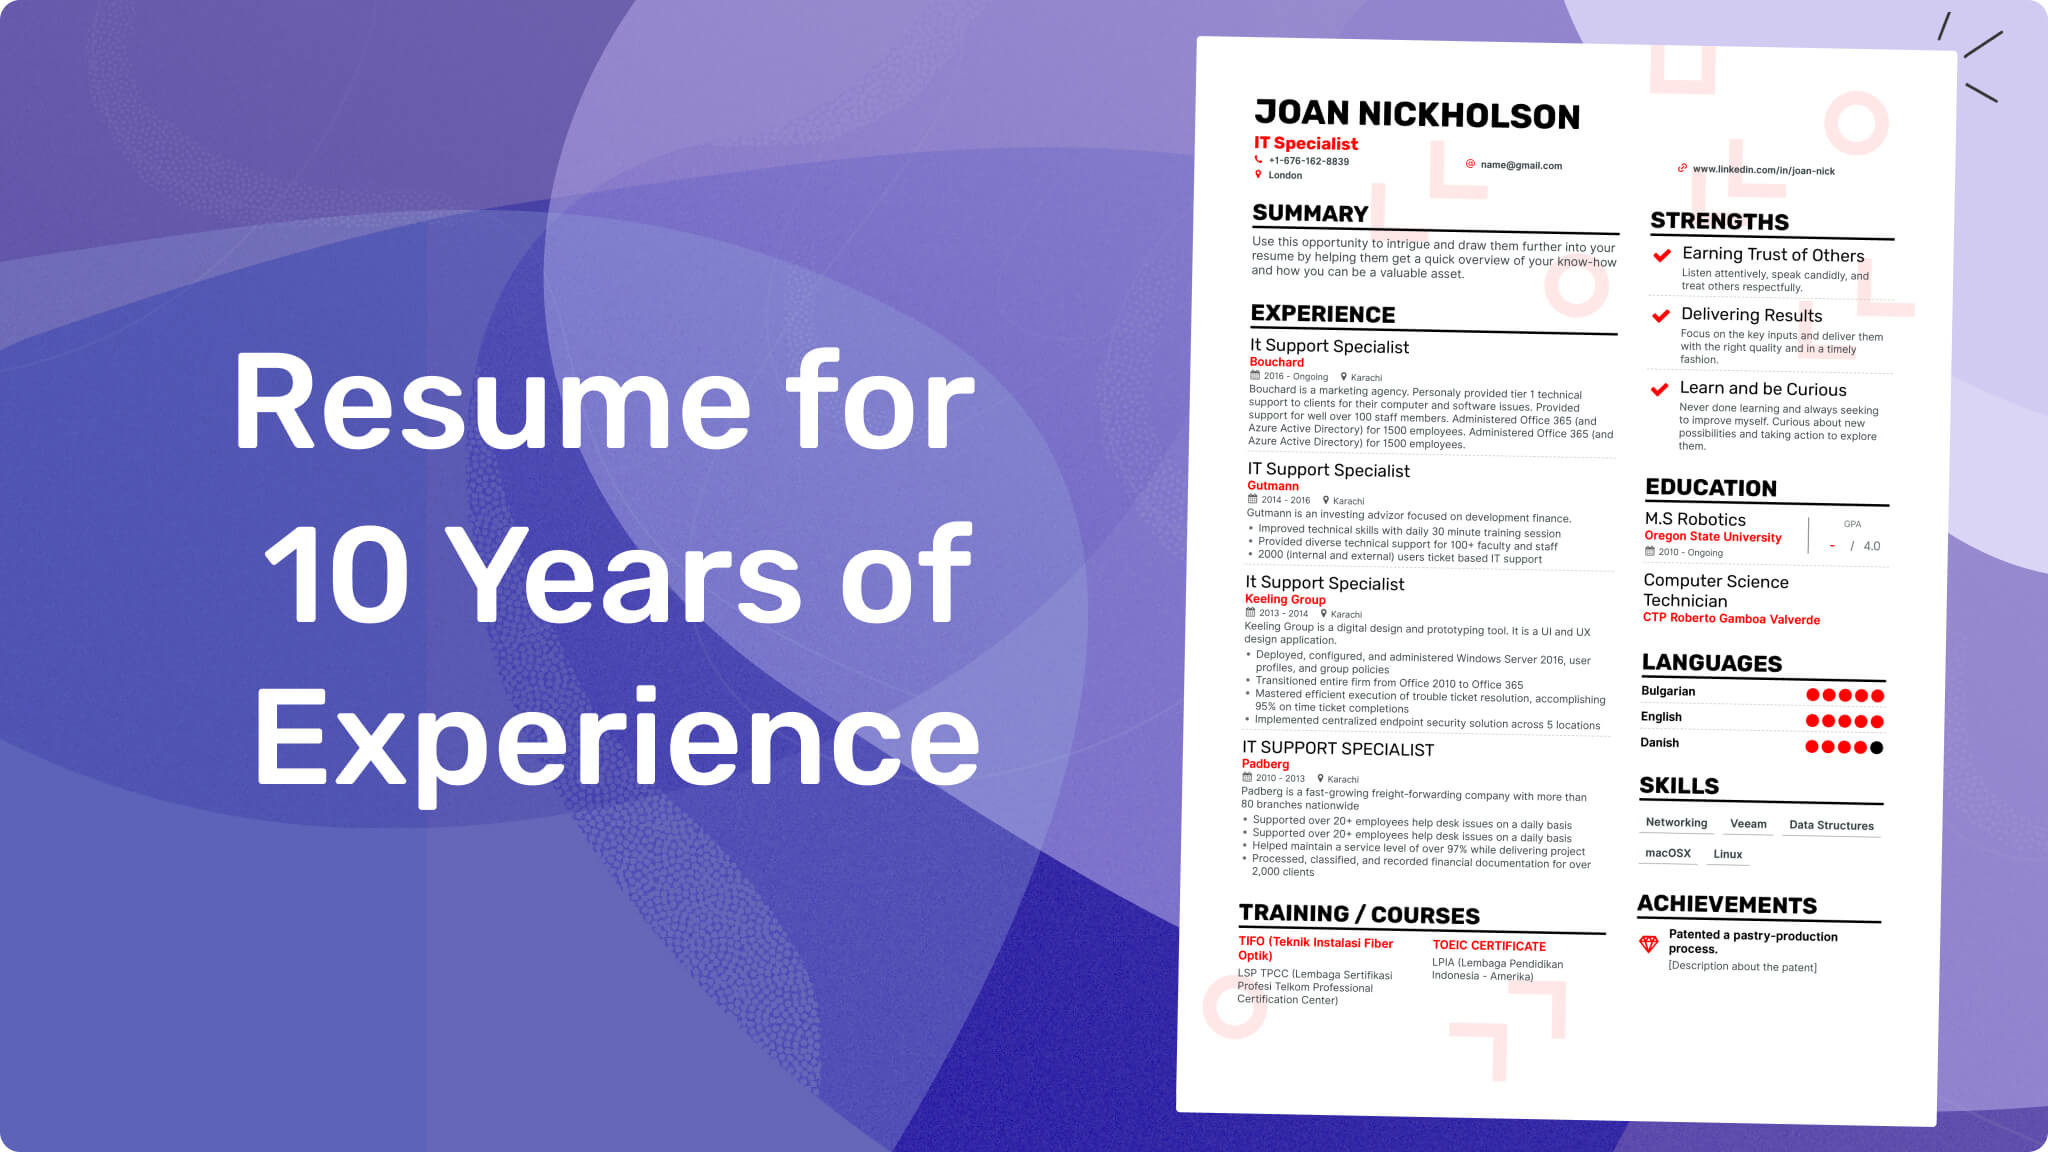 10 Years It Experience Resume Samples 83 Resume Summary Examples & How-to Guide for 2022